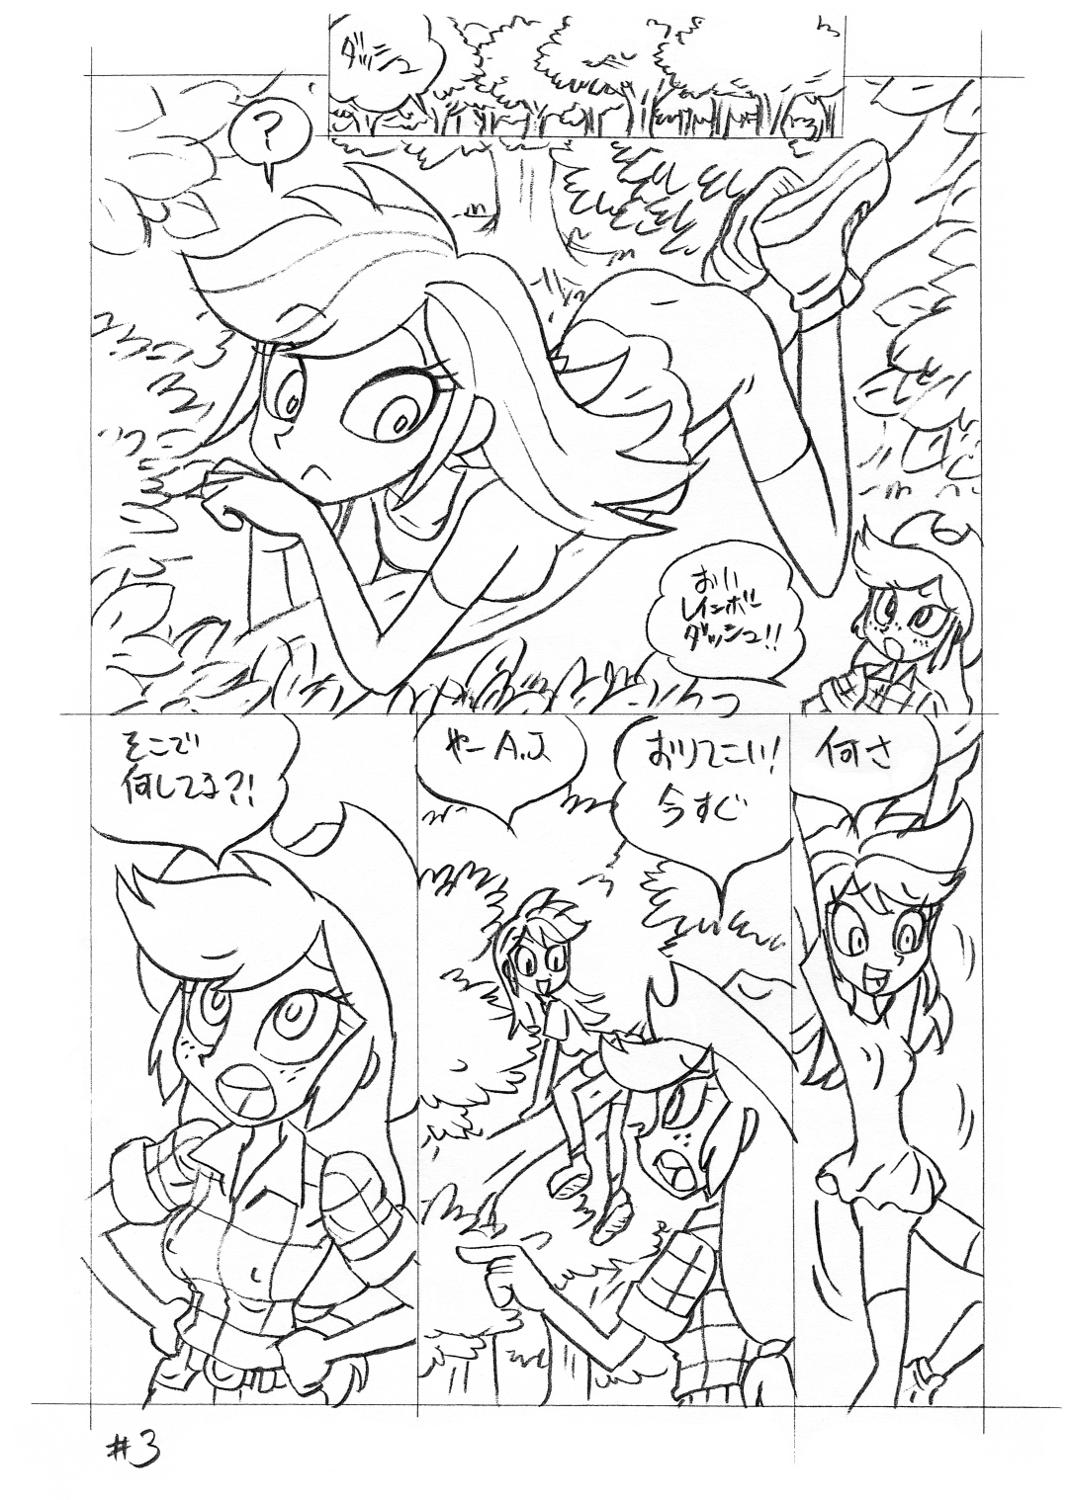 Para Psychosomatic Counterfeit EX- A.J. in E.G. Style - My little pony friendship is magic Free Amature Porn - Page 2